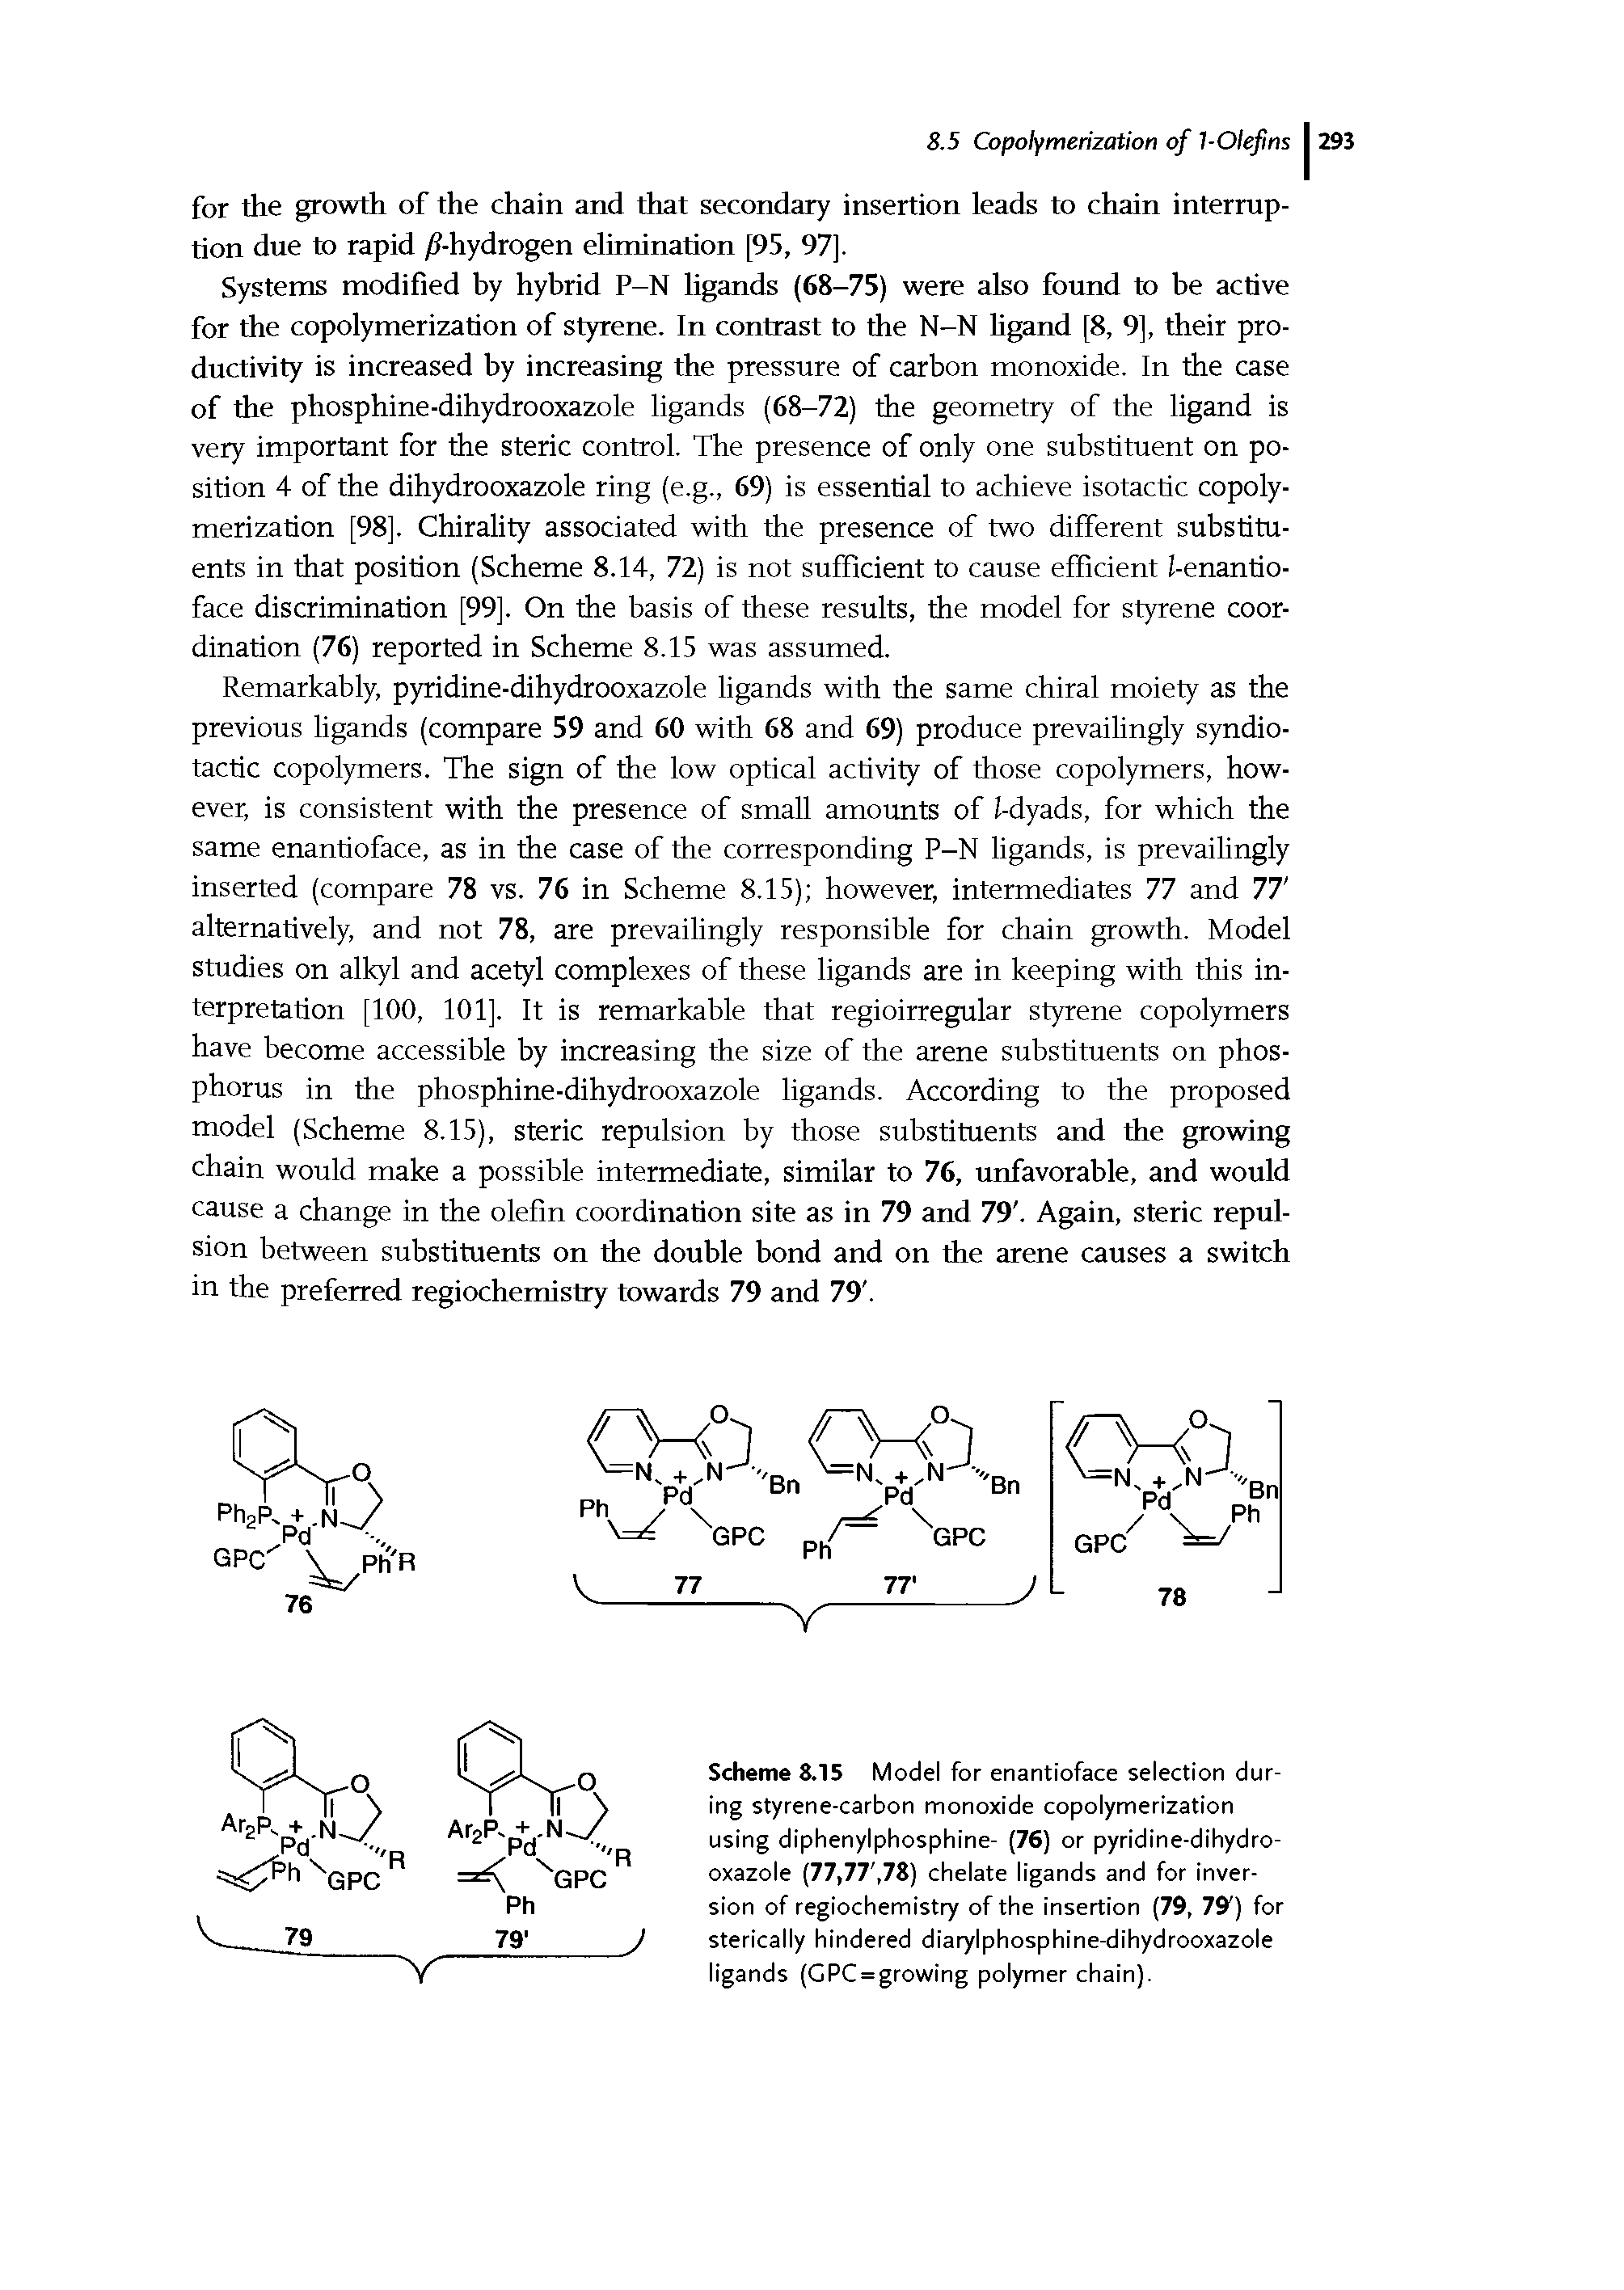 Scheme 8.15 Model for enantioface selection during styrene-carbon monoxide copolymerization using diphenylphosphine- (76) or pyridine-dihydrooxazole (77,77, 78) chelate ligands and for inversion of regiochemistry of the insertion (79, 79 ) for sterically hindered diarylphosphine-dihydrooxazole ligands (GPC = growing polymer chain).